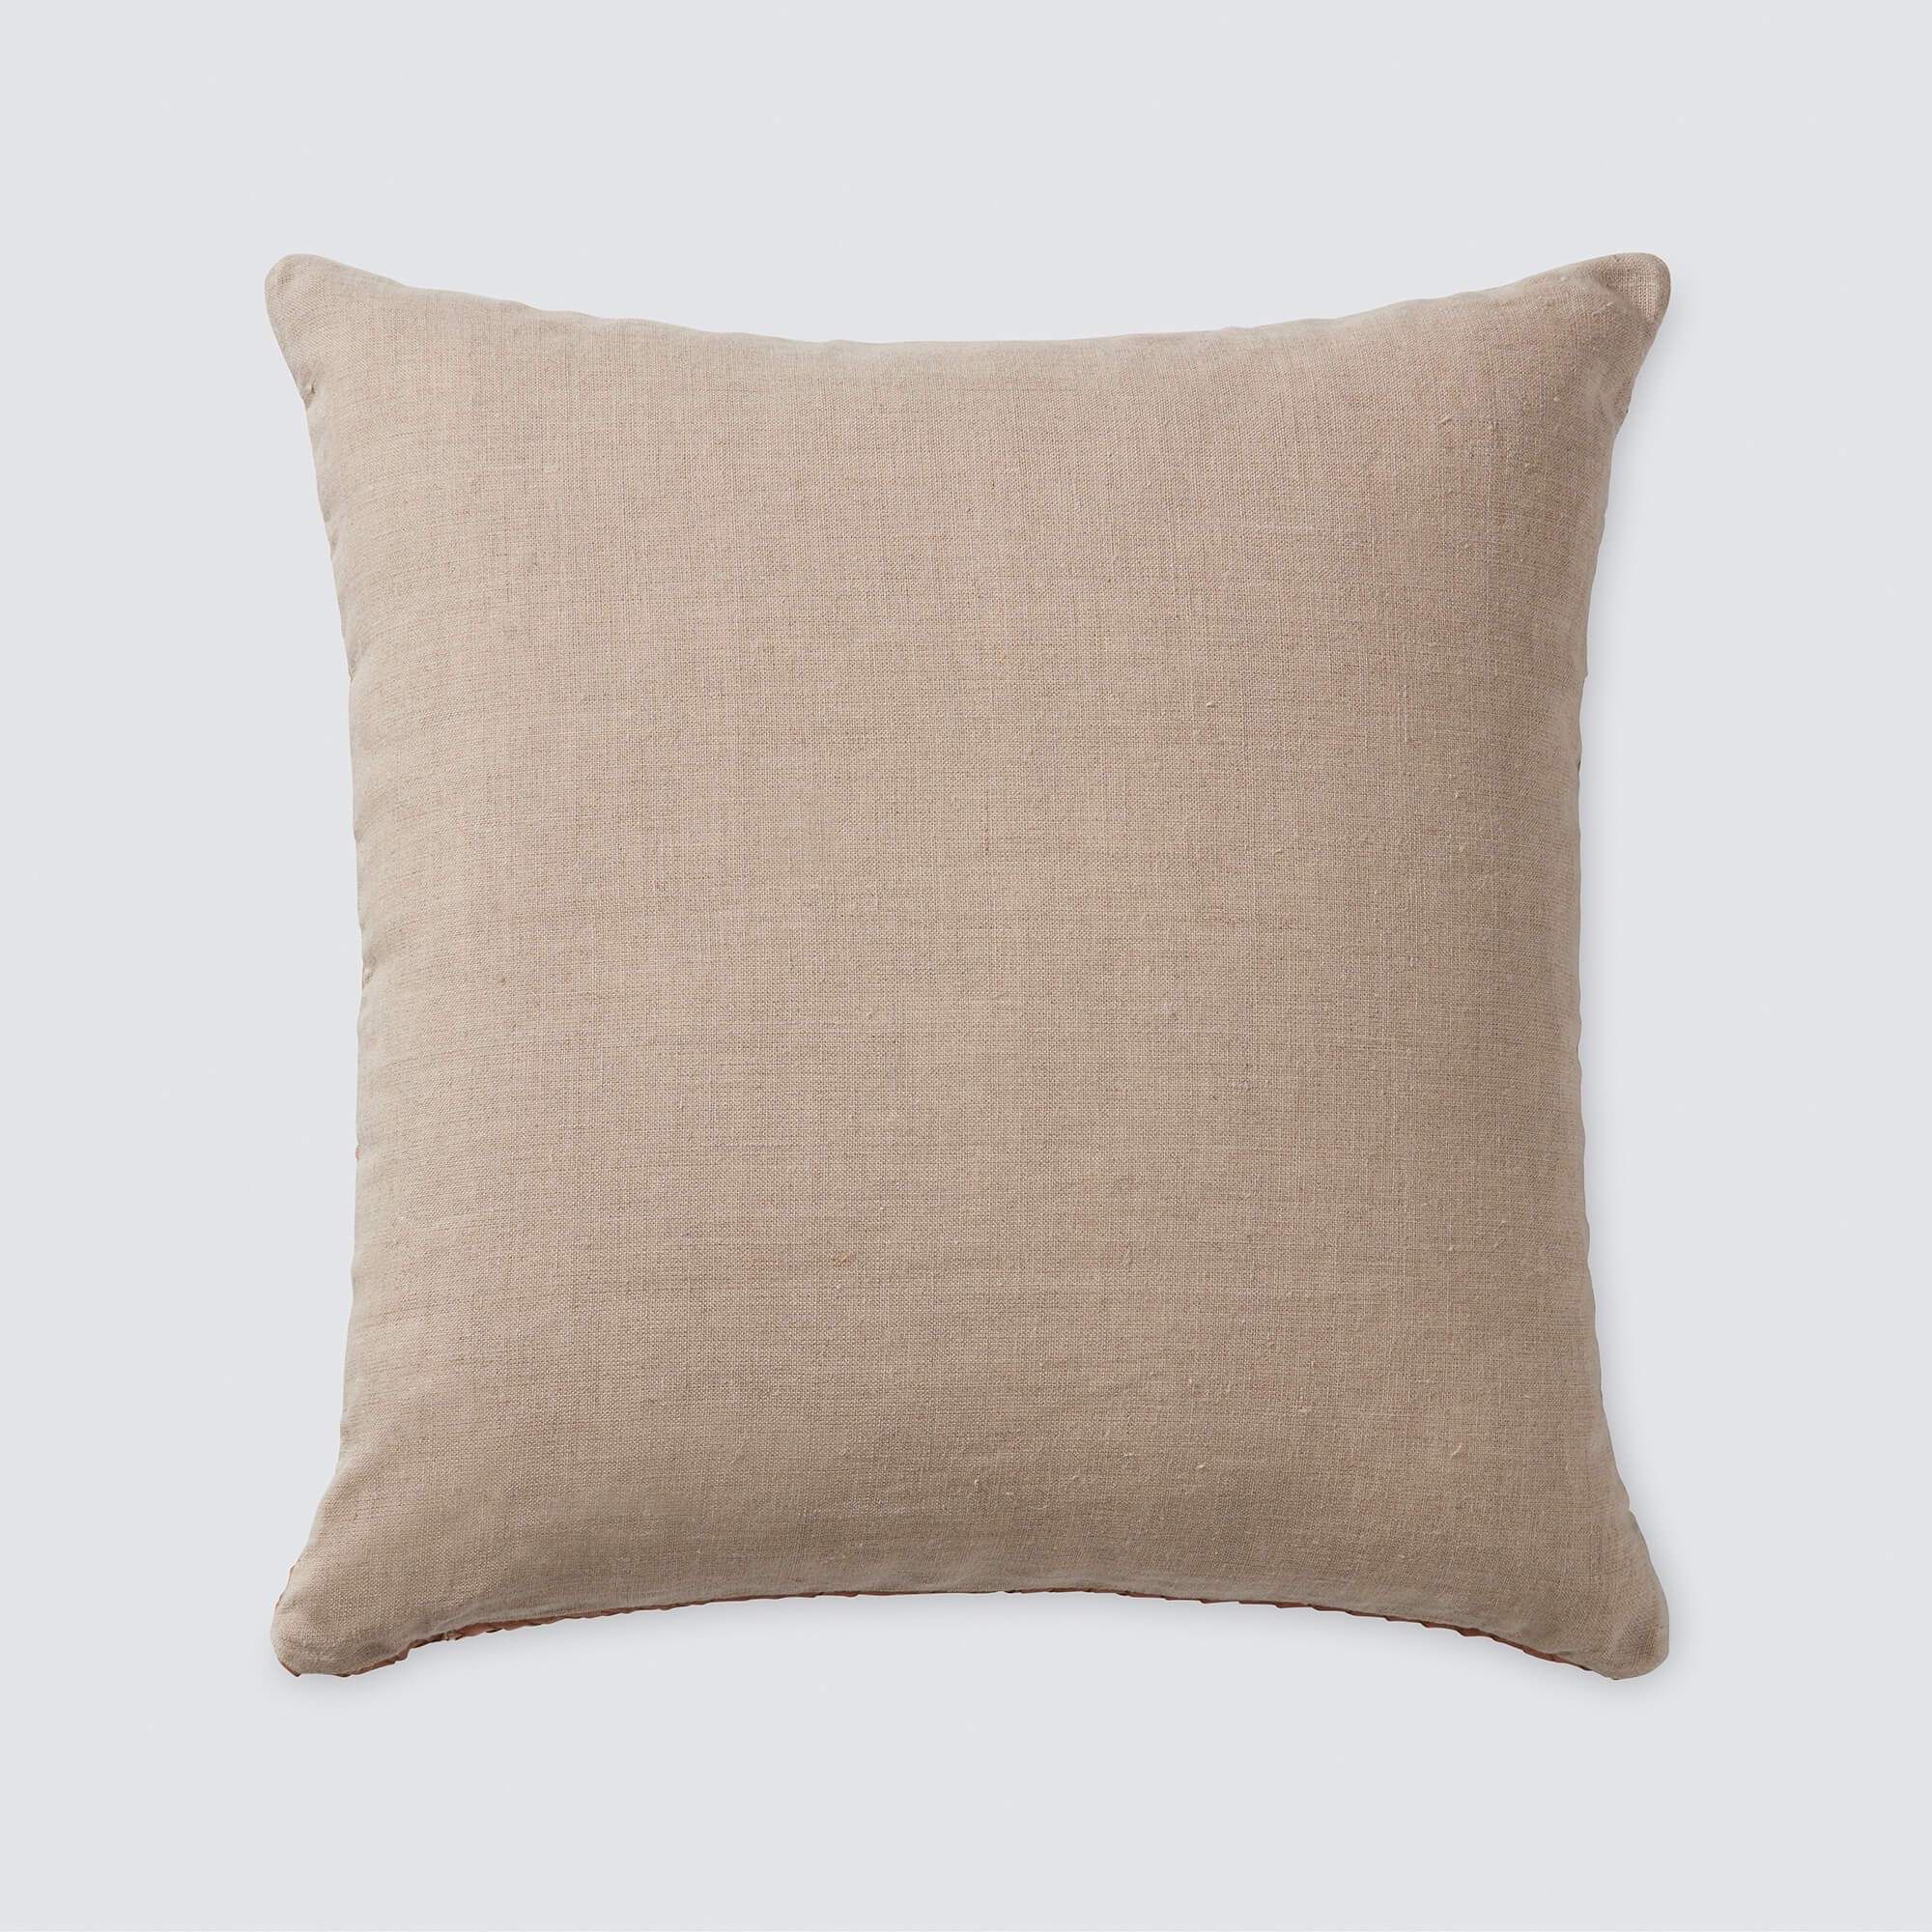 Dhara Leather Square Pillow | Sustainable Modern Handcrafted in India   – The Citizenry | The Citizenry